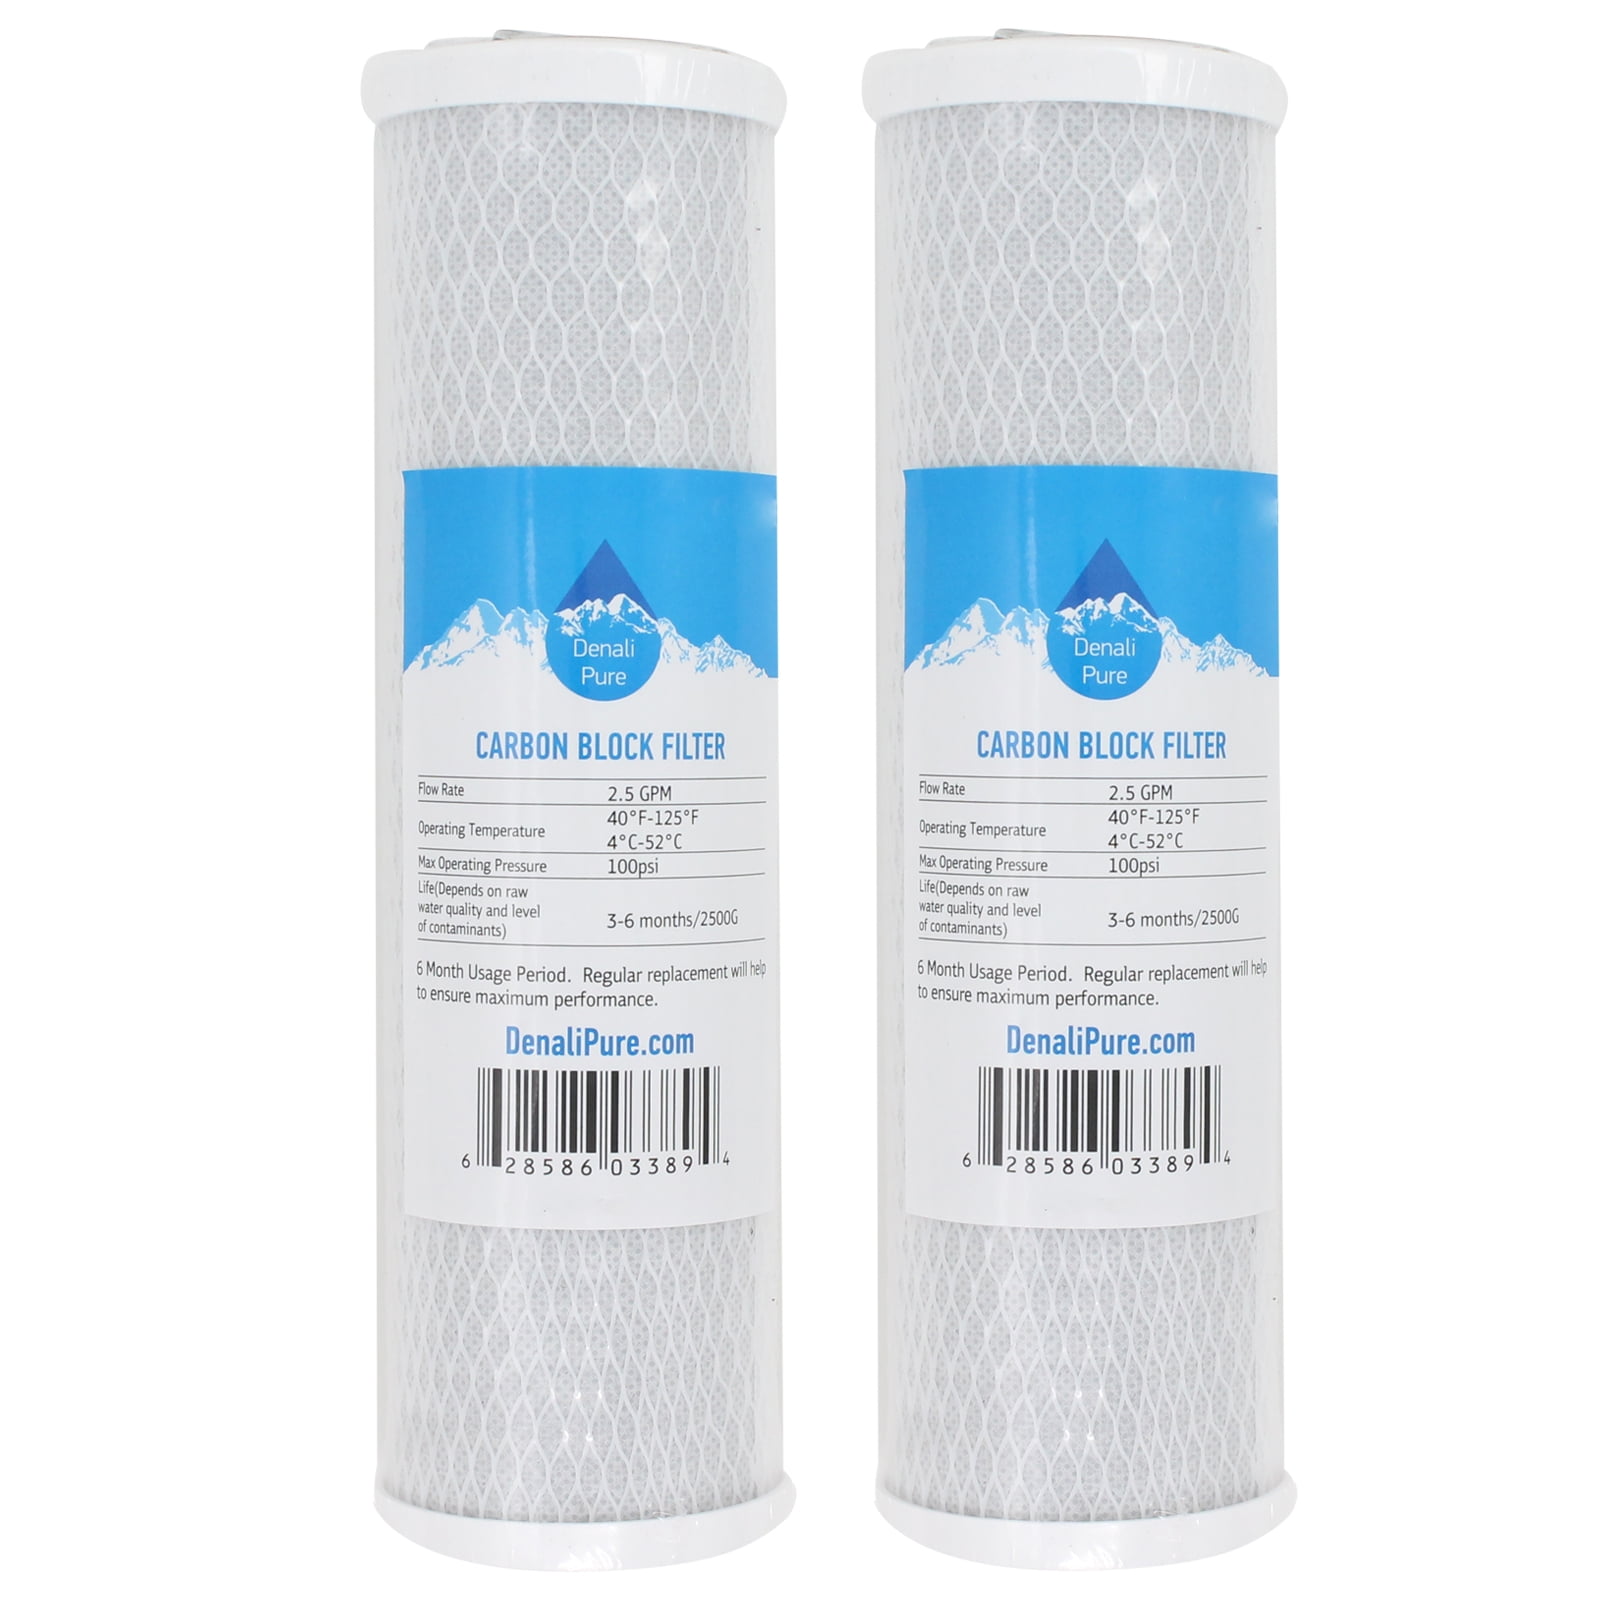 Includes Carbon Block Filter & PP Sediment Filter 2-Pack Replacement Filter Kit Compatible with Glacier Bay HDGUSS4 RO System Denali Pure Brand 